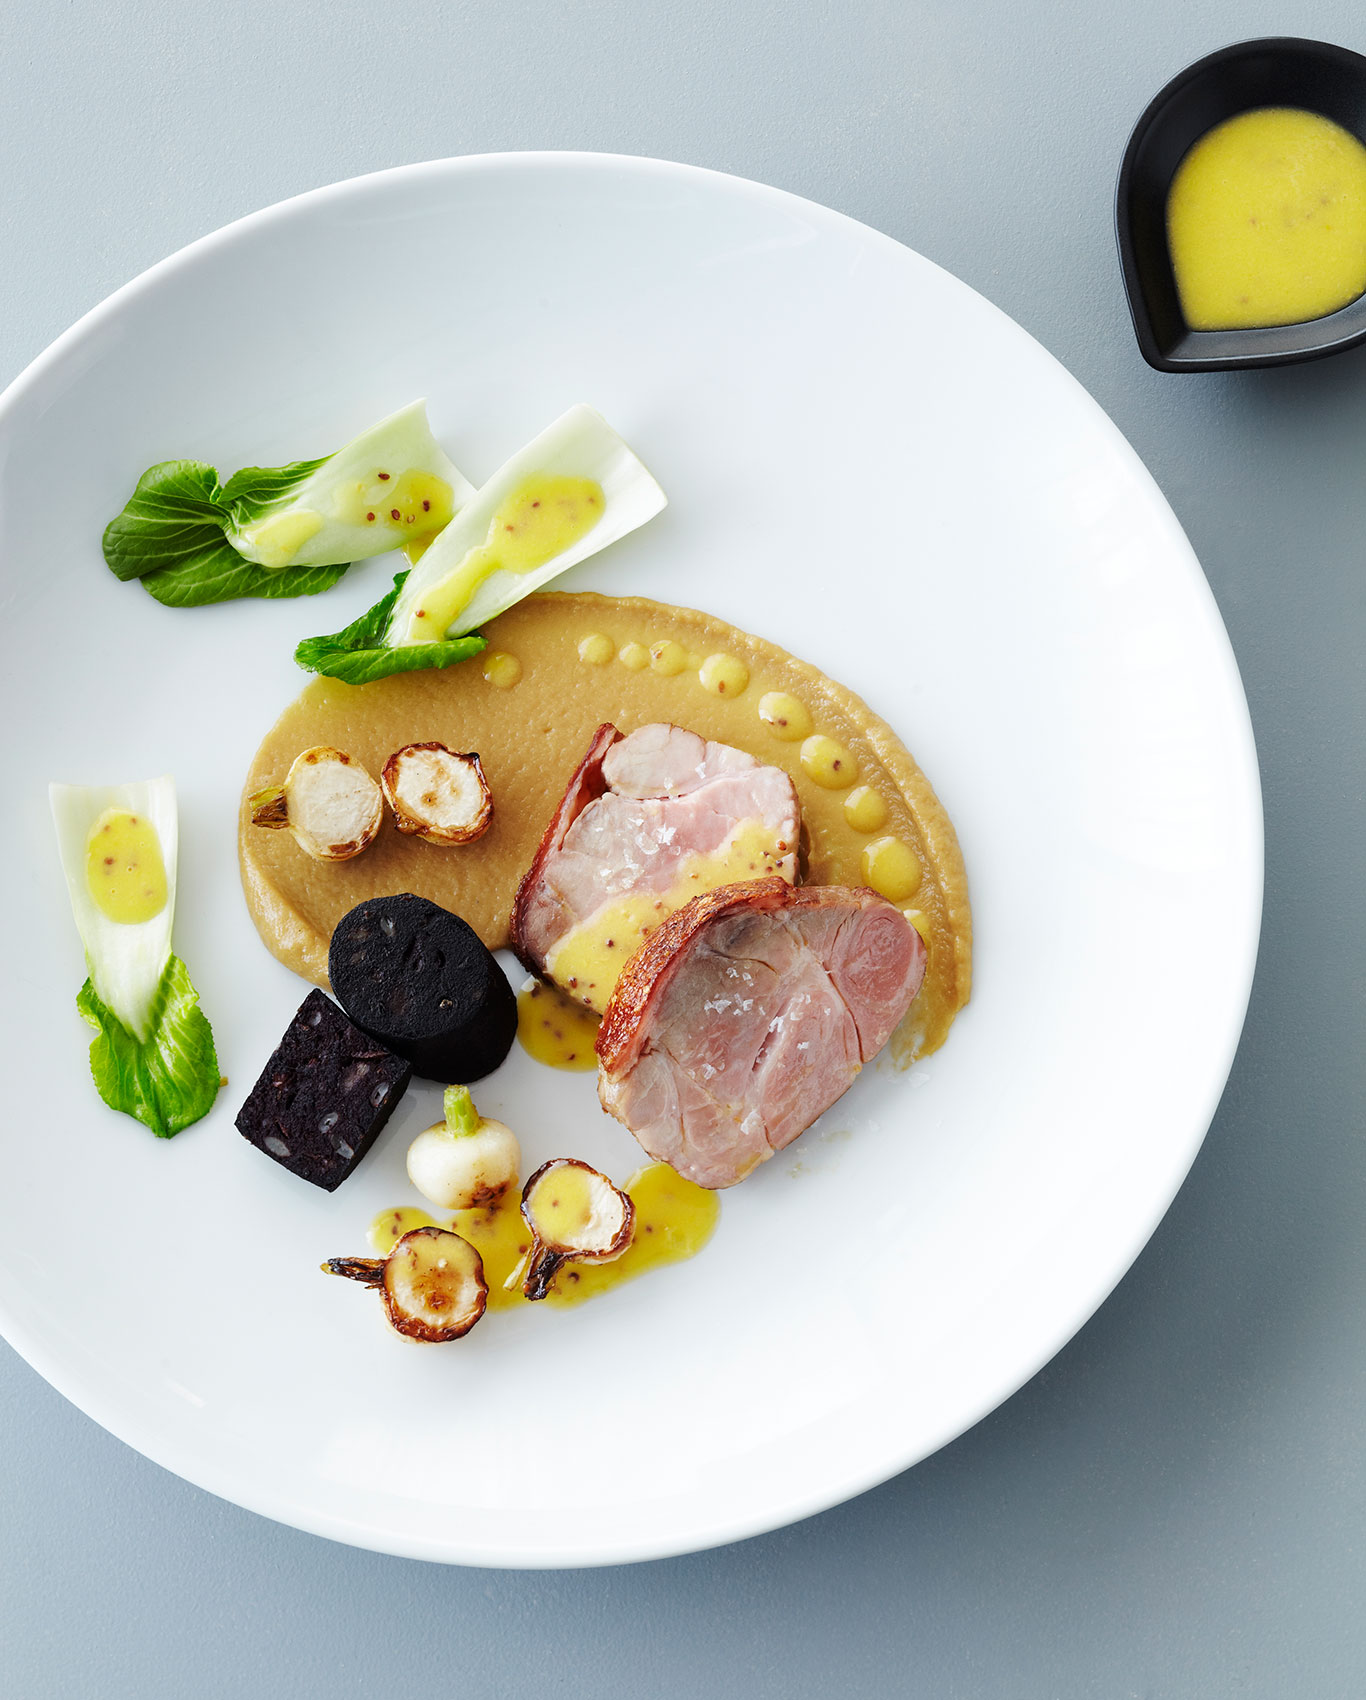 Southon Cooking • The Foodstore Razorback Pork with Bok Choy & Black Pudding • Hospitality & Editorial Food Photography